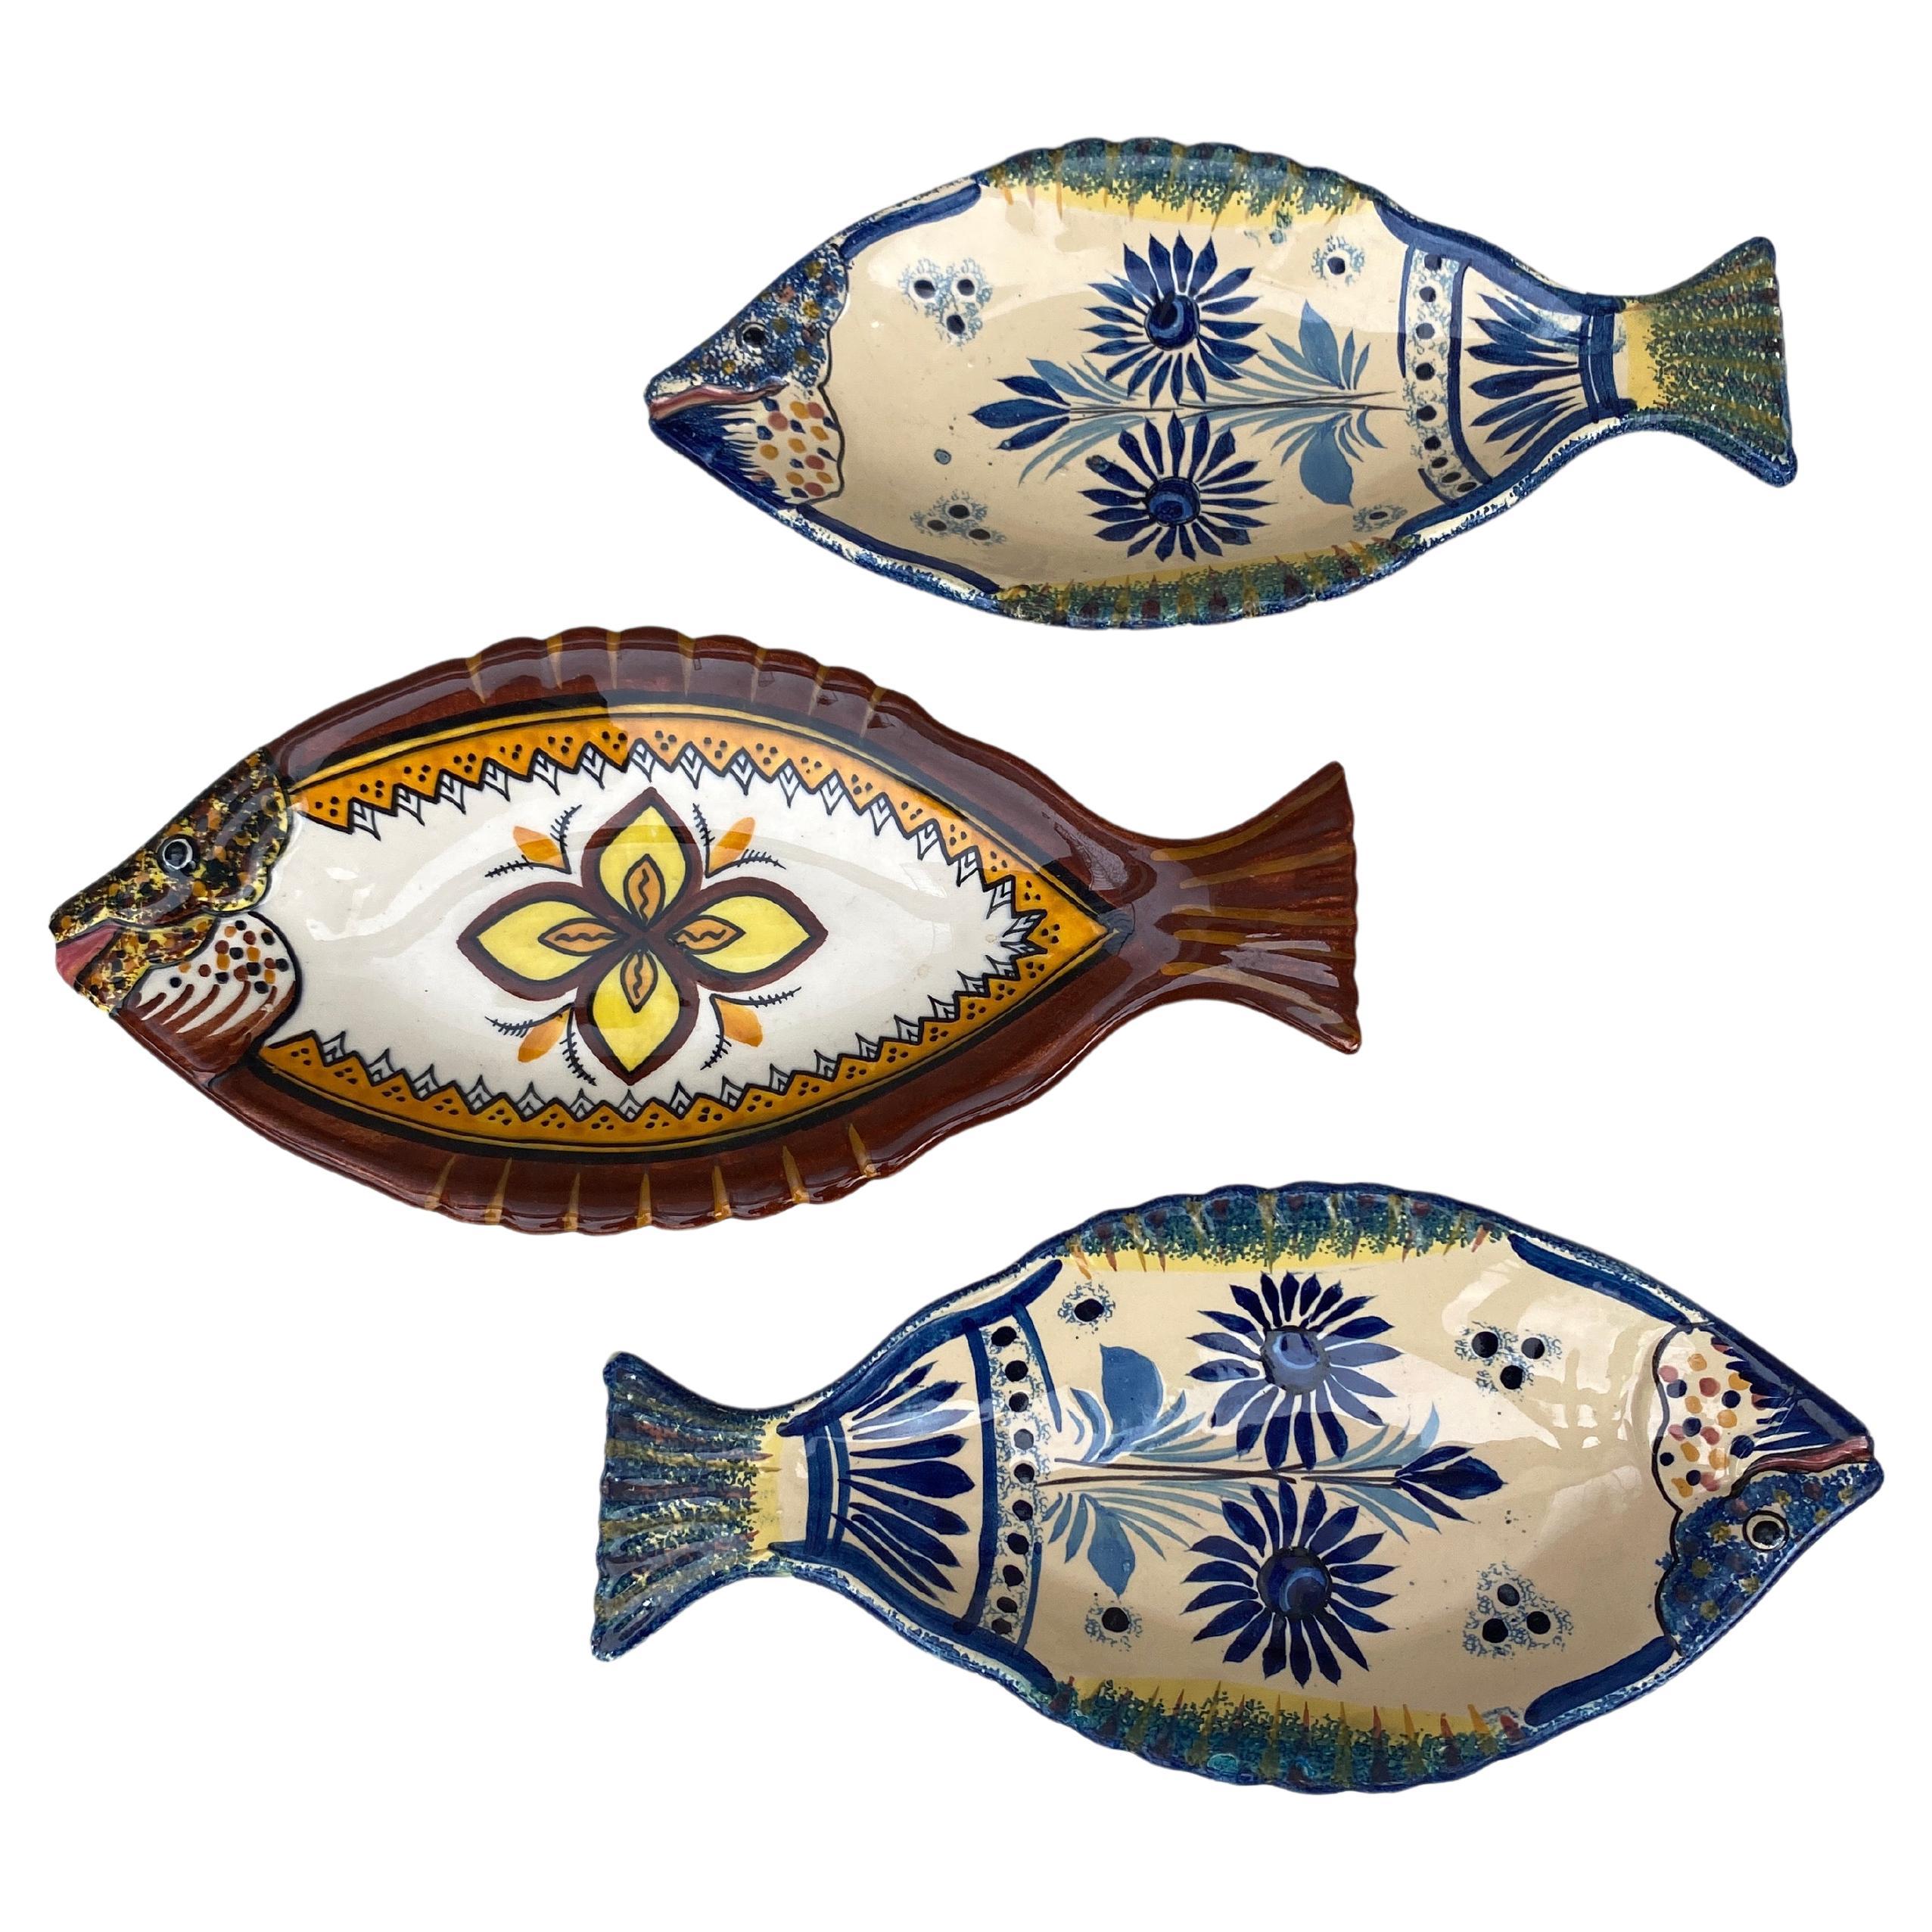 Mid-20th Century French Faience Blue & White Fish Platter Henriot Quimper, Circa 1930 For Sale